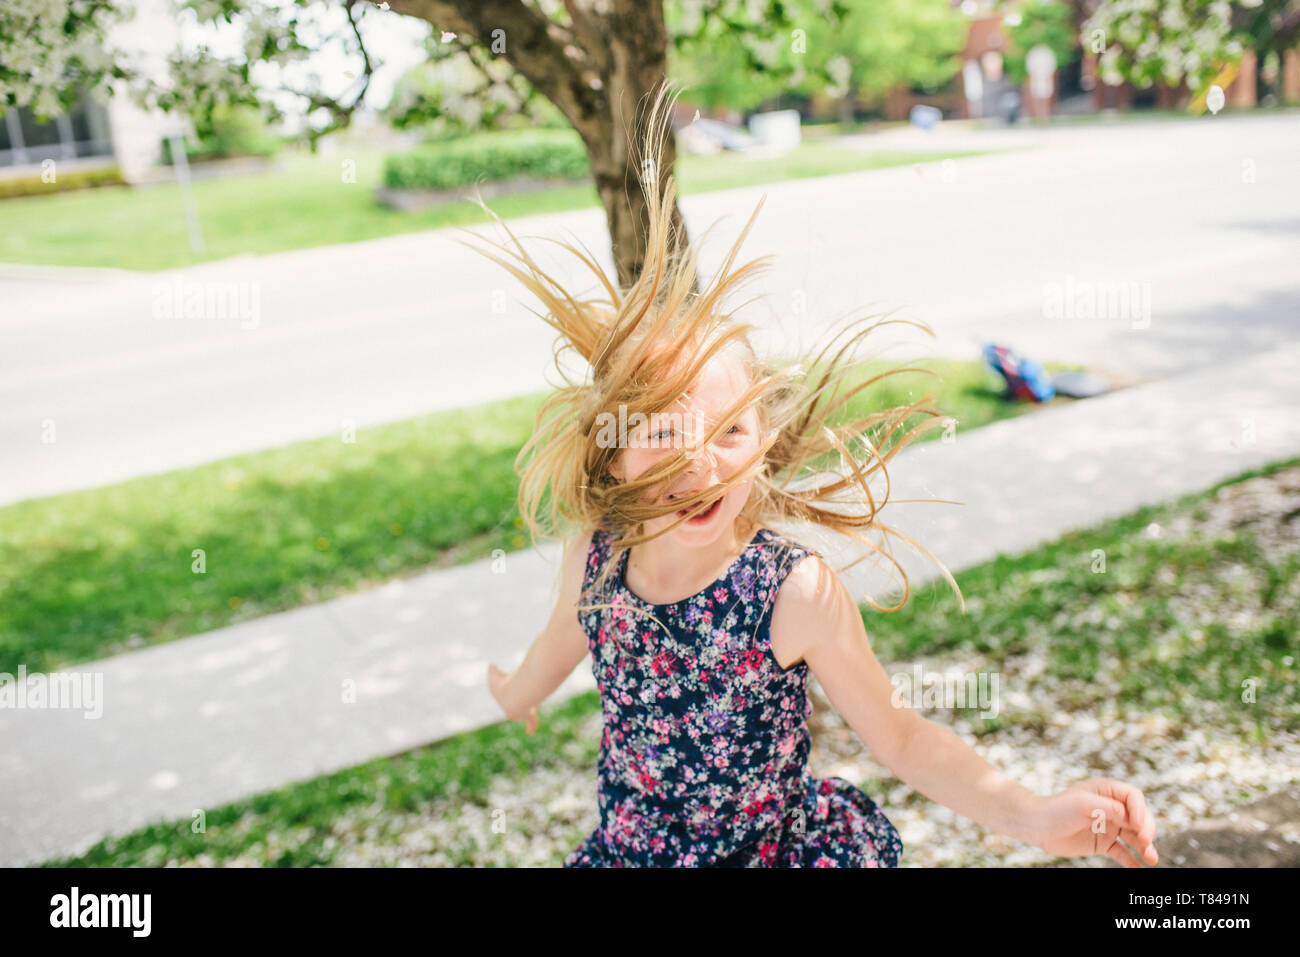 Girl with long blond hair dancing on suburban street Stock Photo